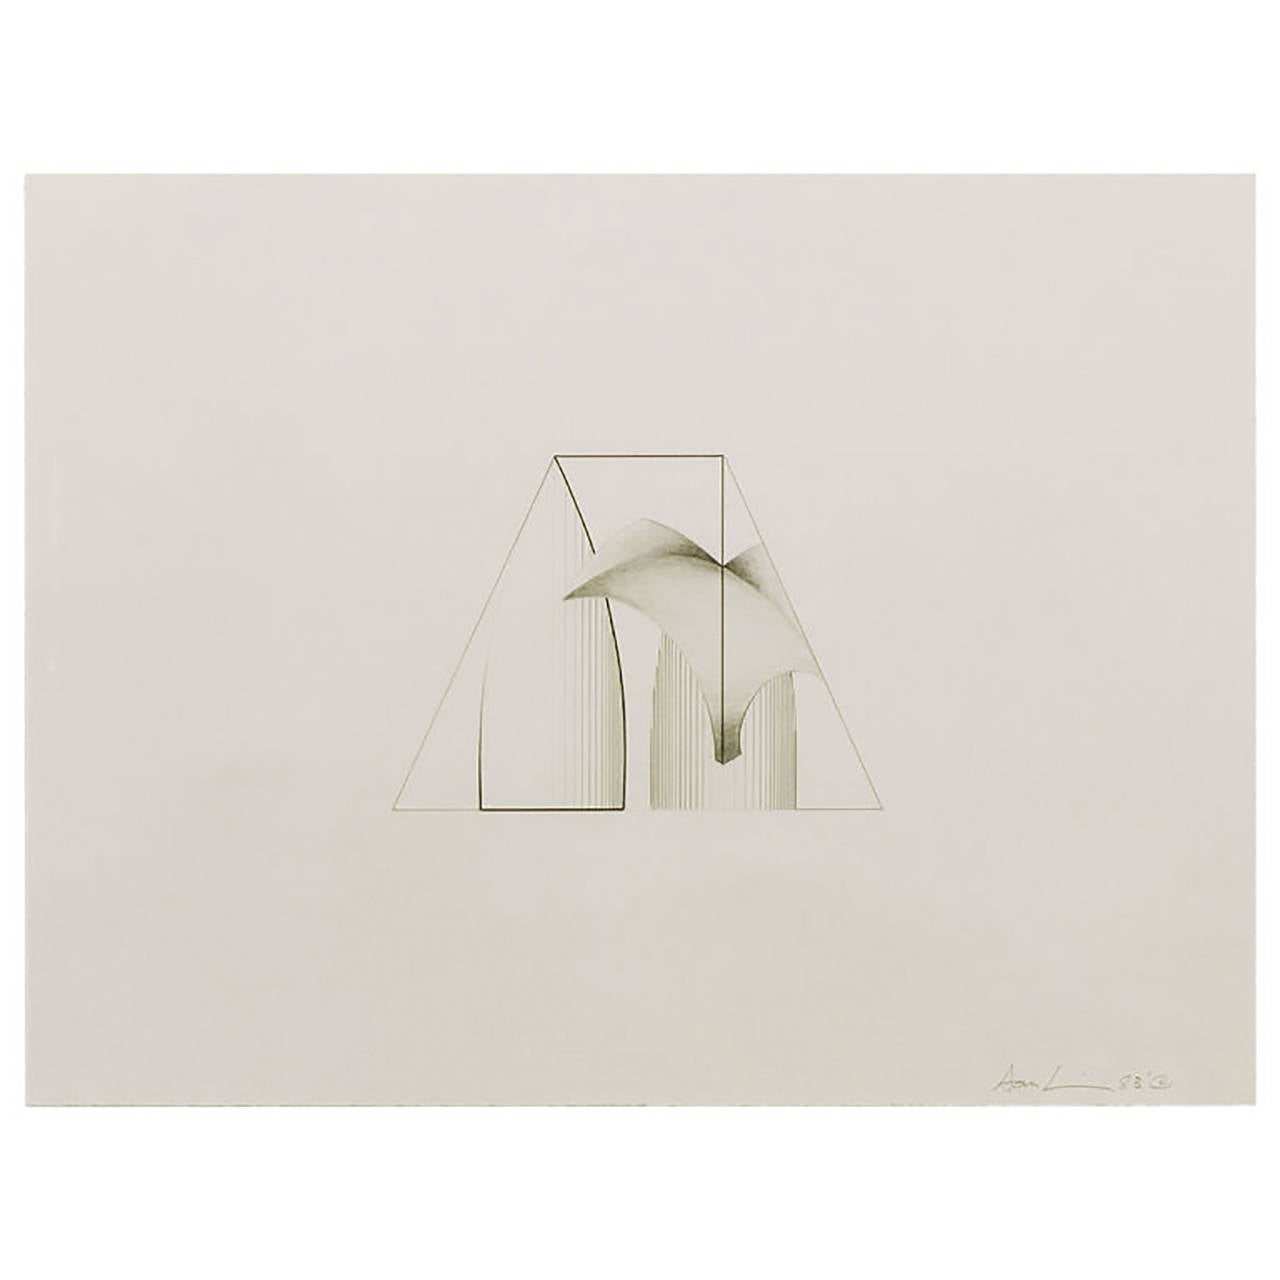 Original geometric abstract executed in graphite on arches paper titled, Celestial City #12, by American artist Dan Ramirez, born 1941. Image size is 6